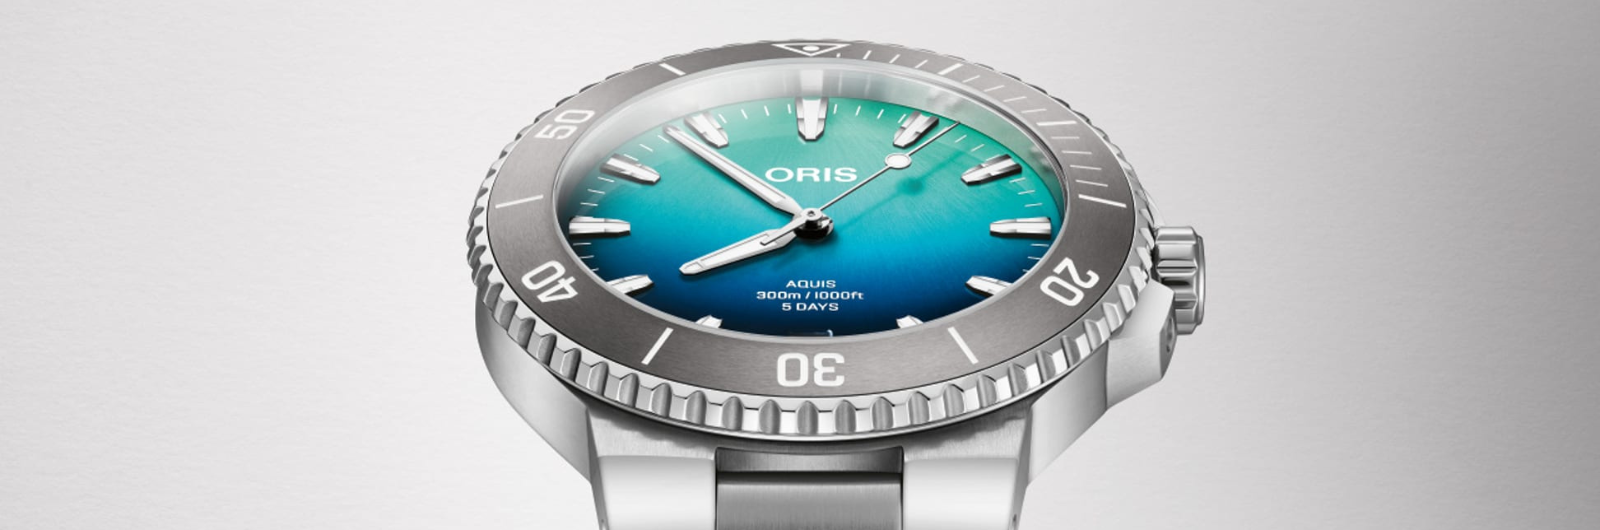 The new oris - GREAT BARRIER REEF LIMITED EDITION IV